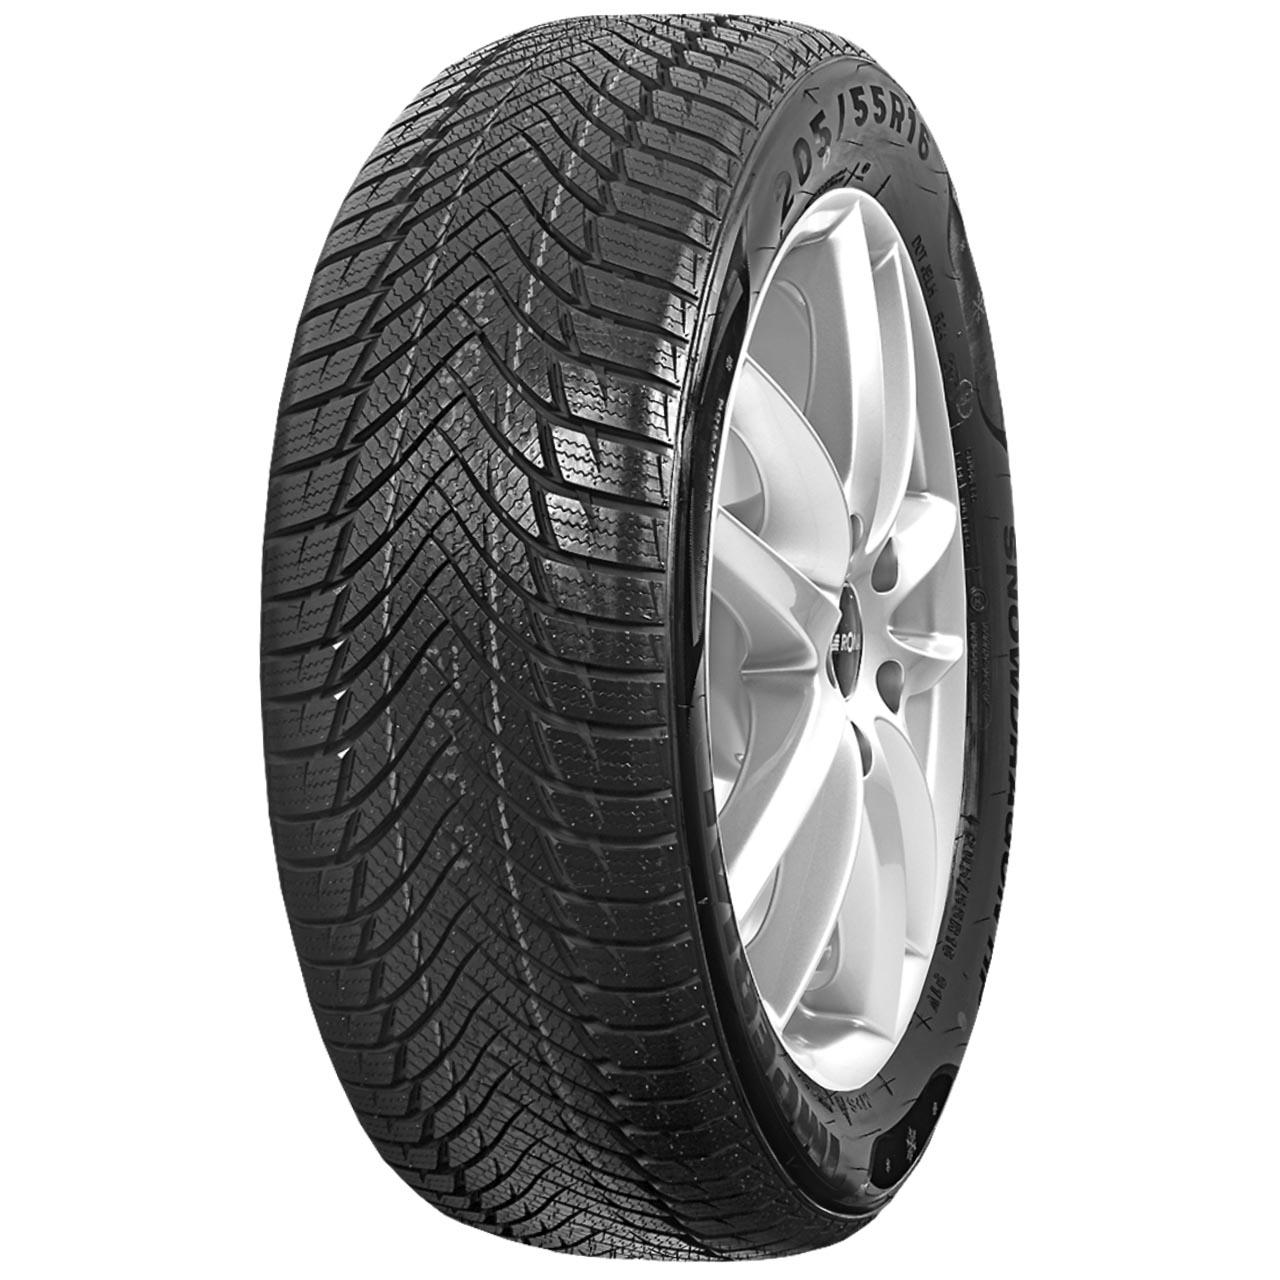 Imperial Snowdragon UHP 225/55R17 97H